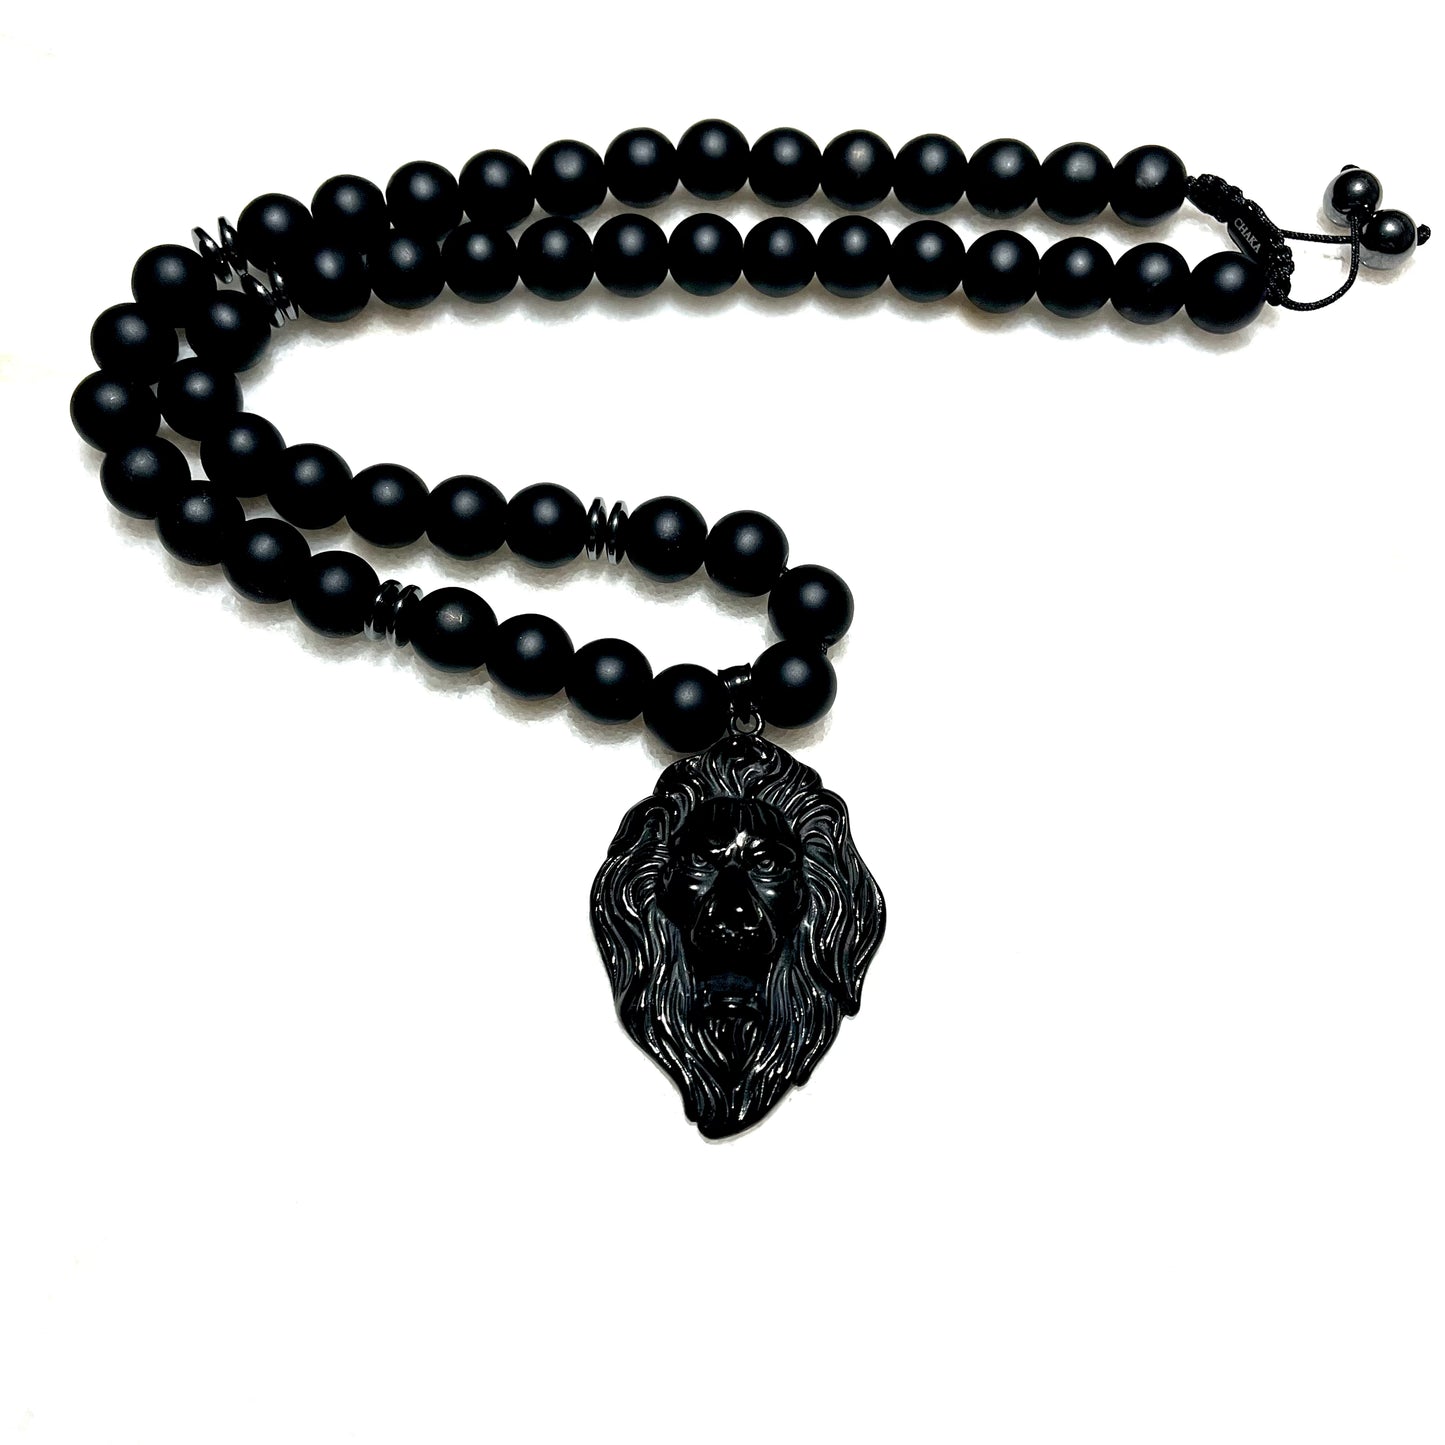 Copy of Red Fire Judah Lion Onyx Necklace(8mm) Chaka Beads